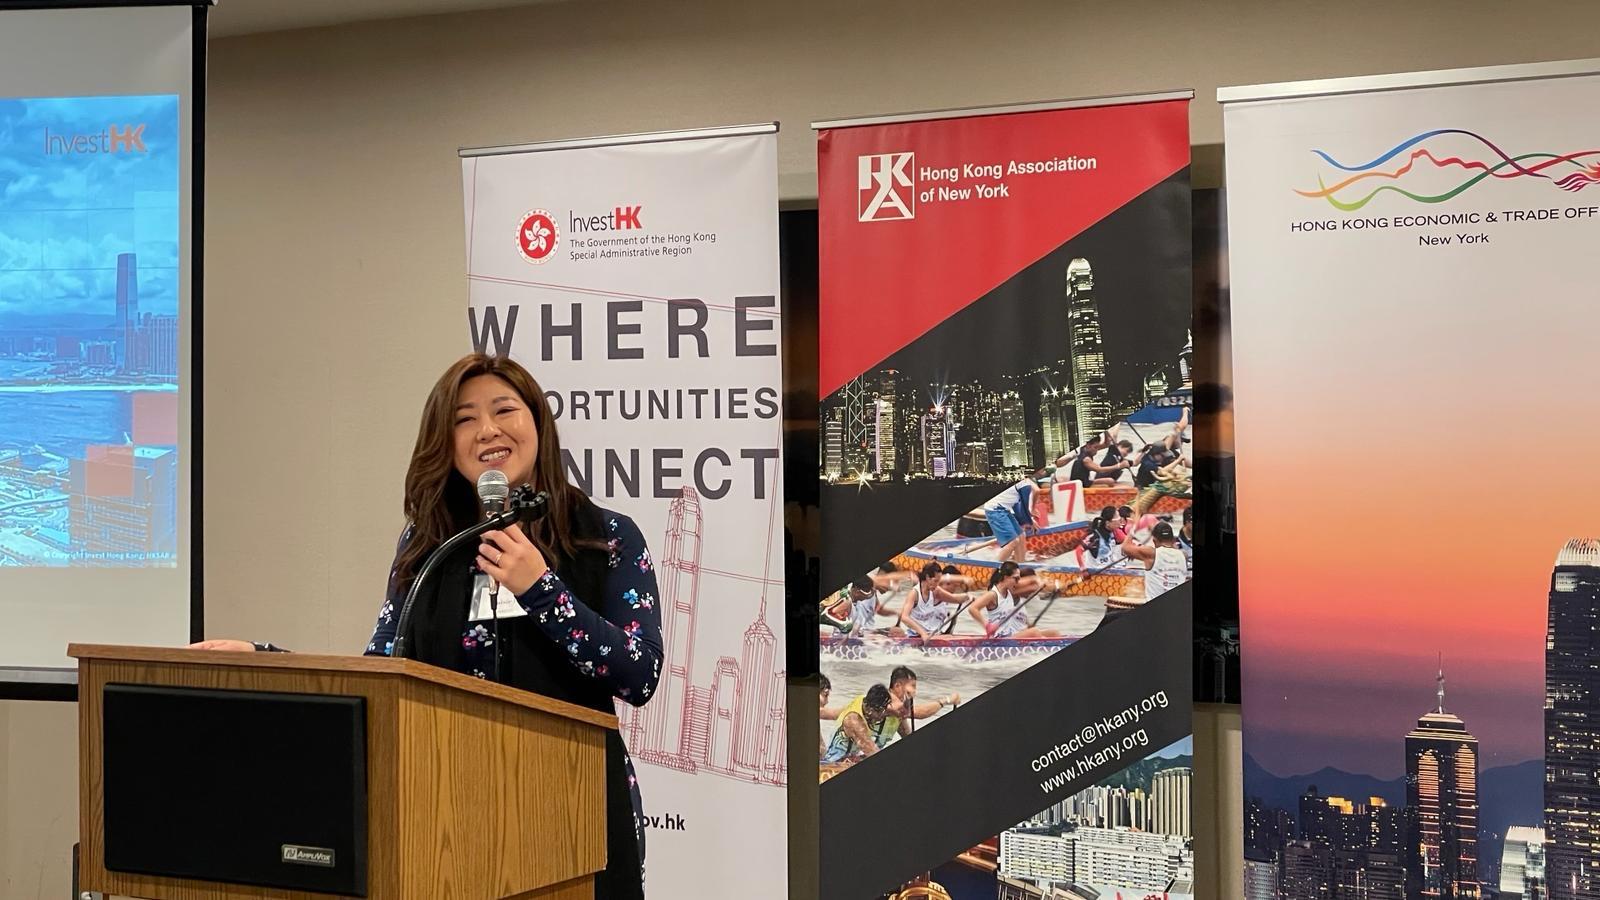 The Hong Kong Economic and Trade Office, New York (HKETONY) and the Invest Hong Kong joined hands to promote business opportunities in Hong Kong at a holiday reception held in New York on January 24 (New York time). In her welcome remarks, the Director of HKETONY, Ms Maisie Ho, gave the guests an update on the latest economic situation and developments in Hong Kong.